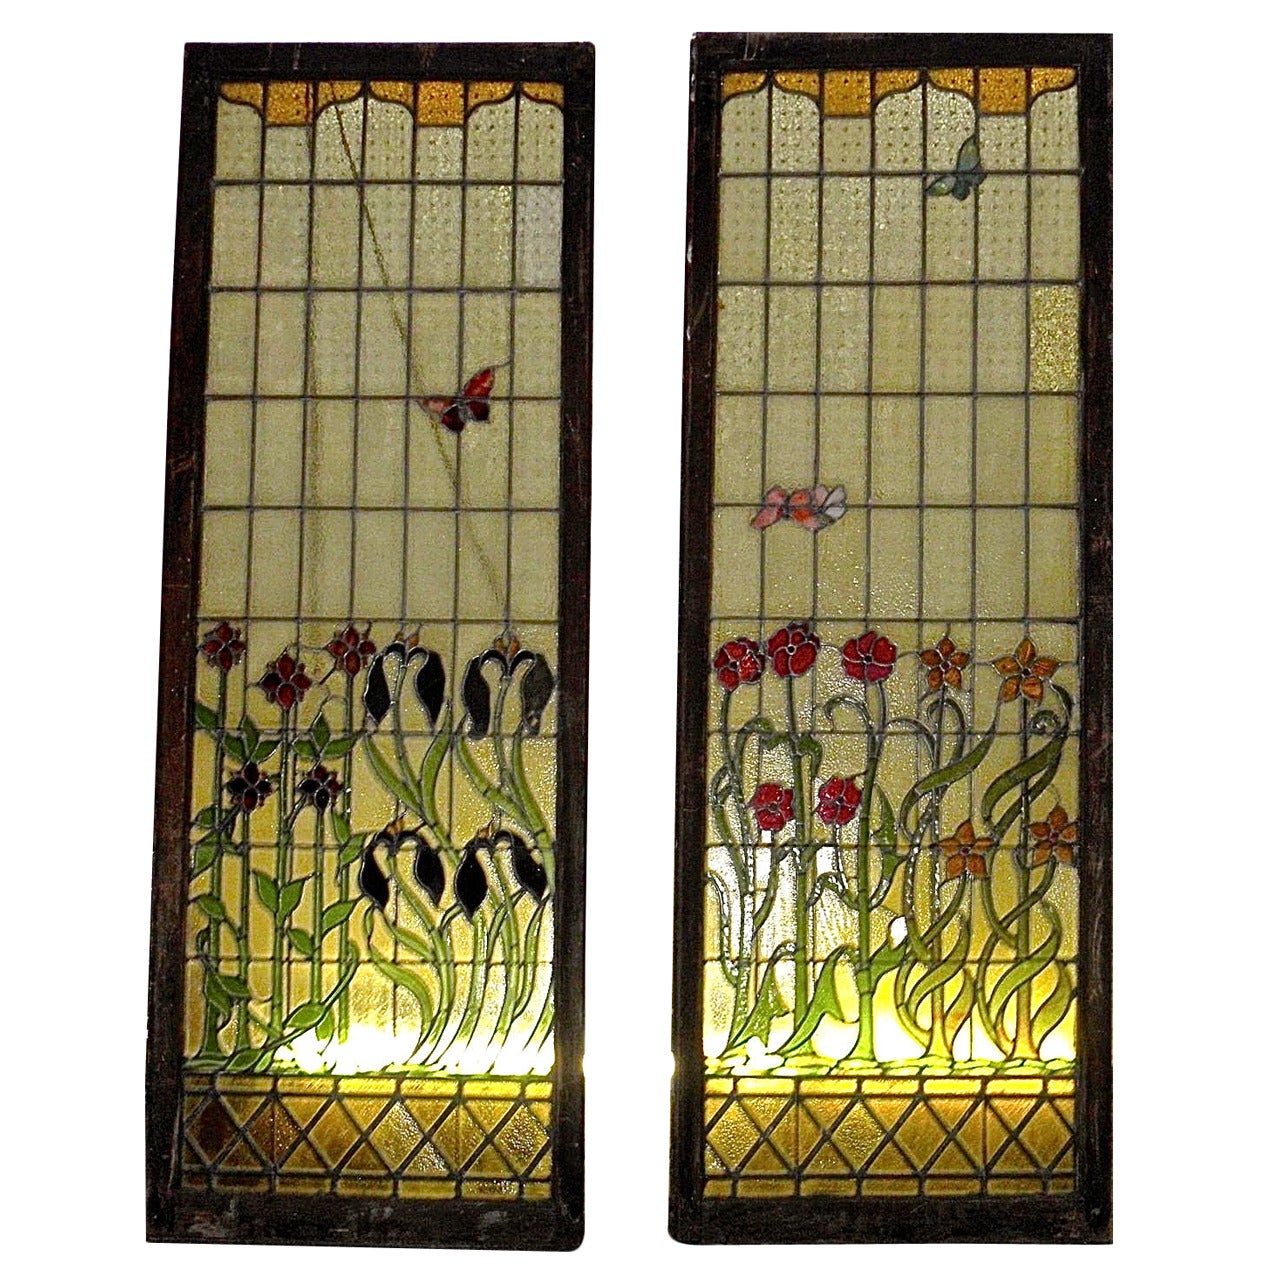 Flower Motif Stained Glass Panels